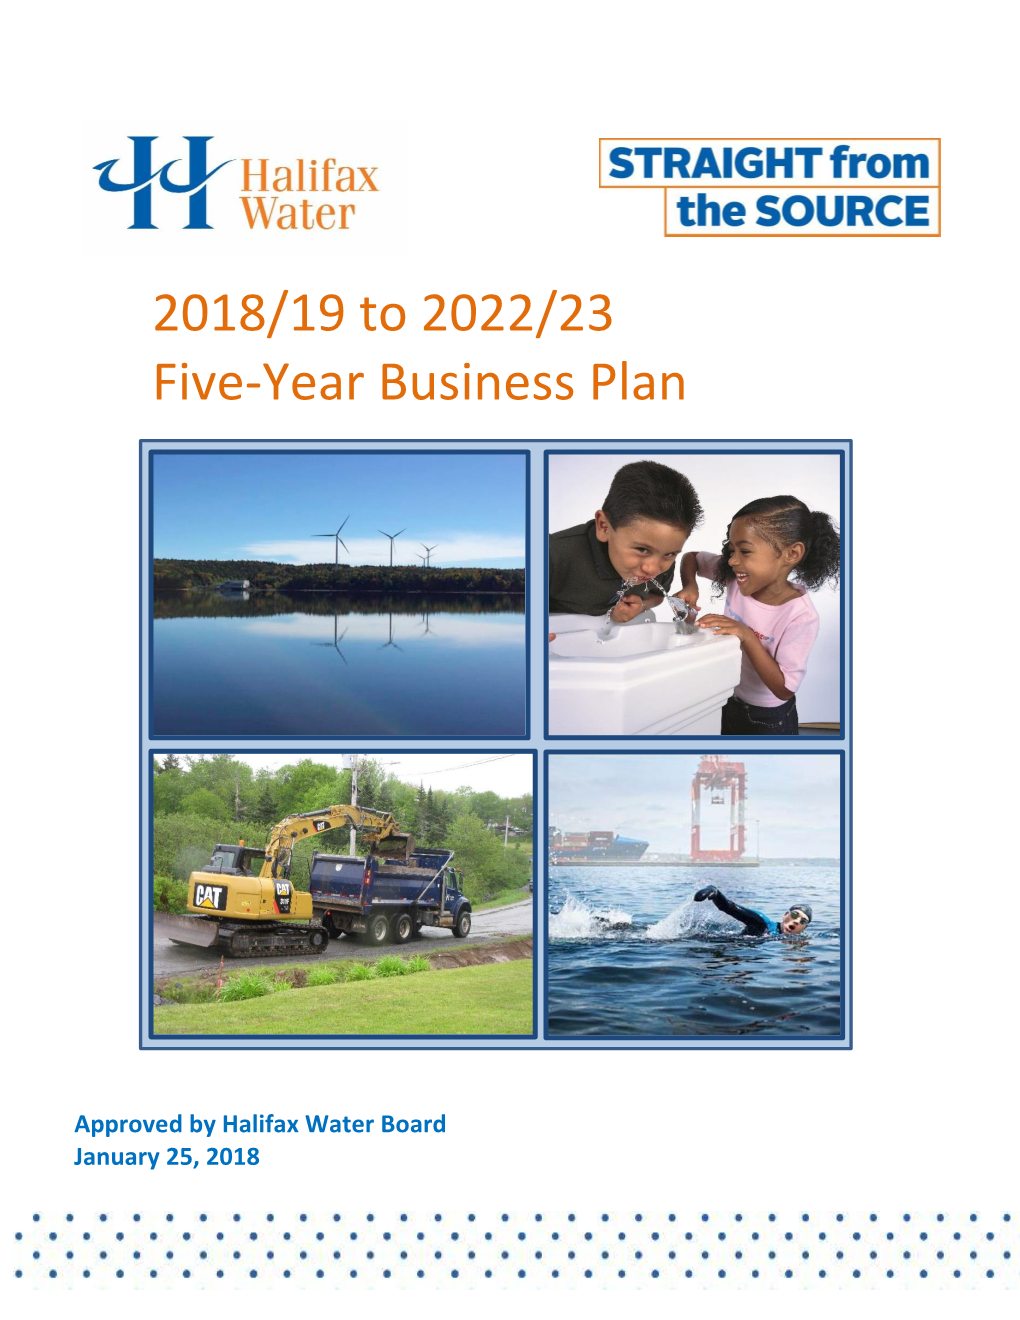 2018/19 to 2022/23 Five-Year Business Plan